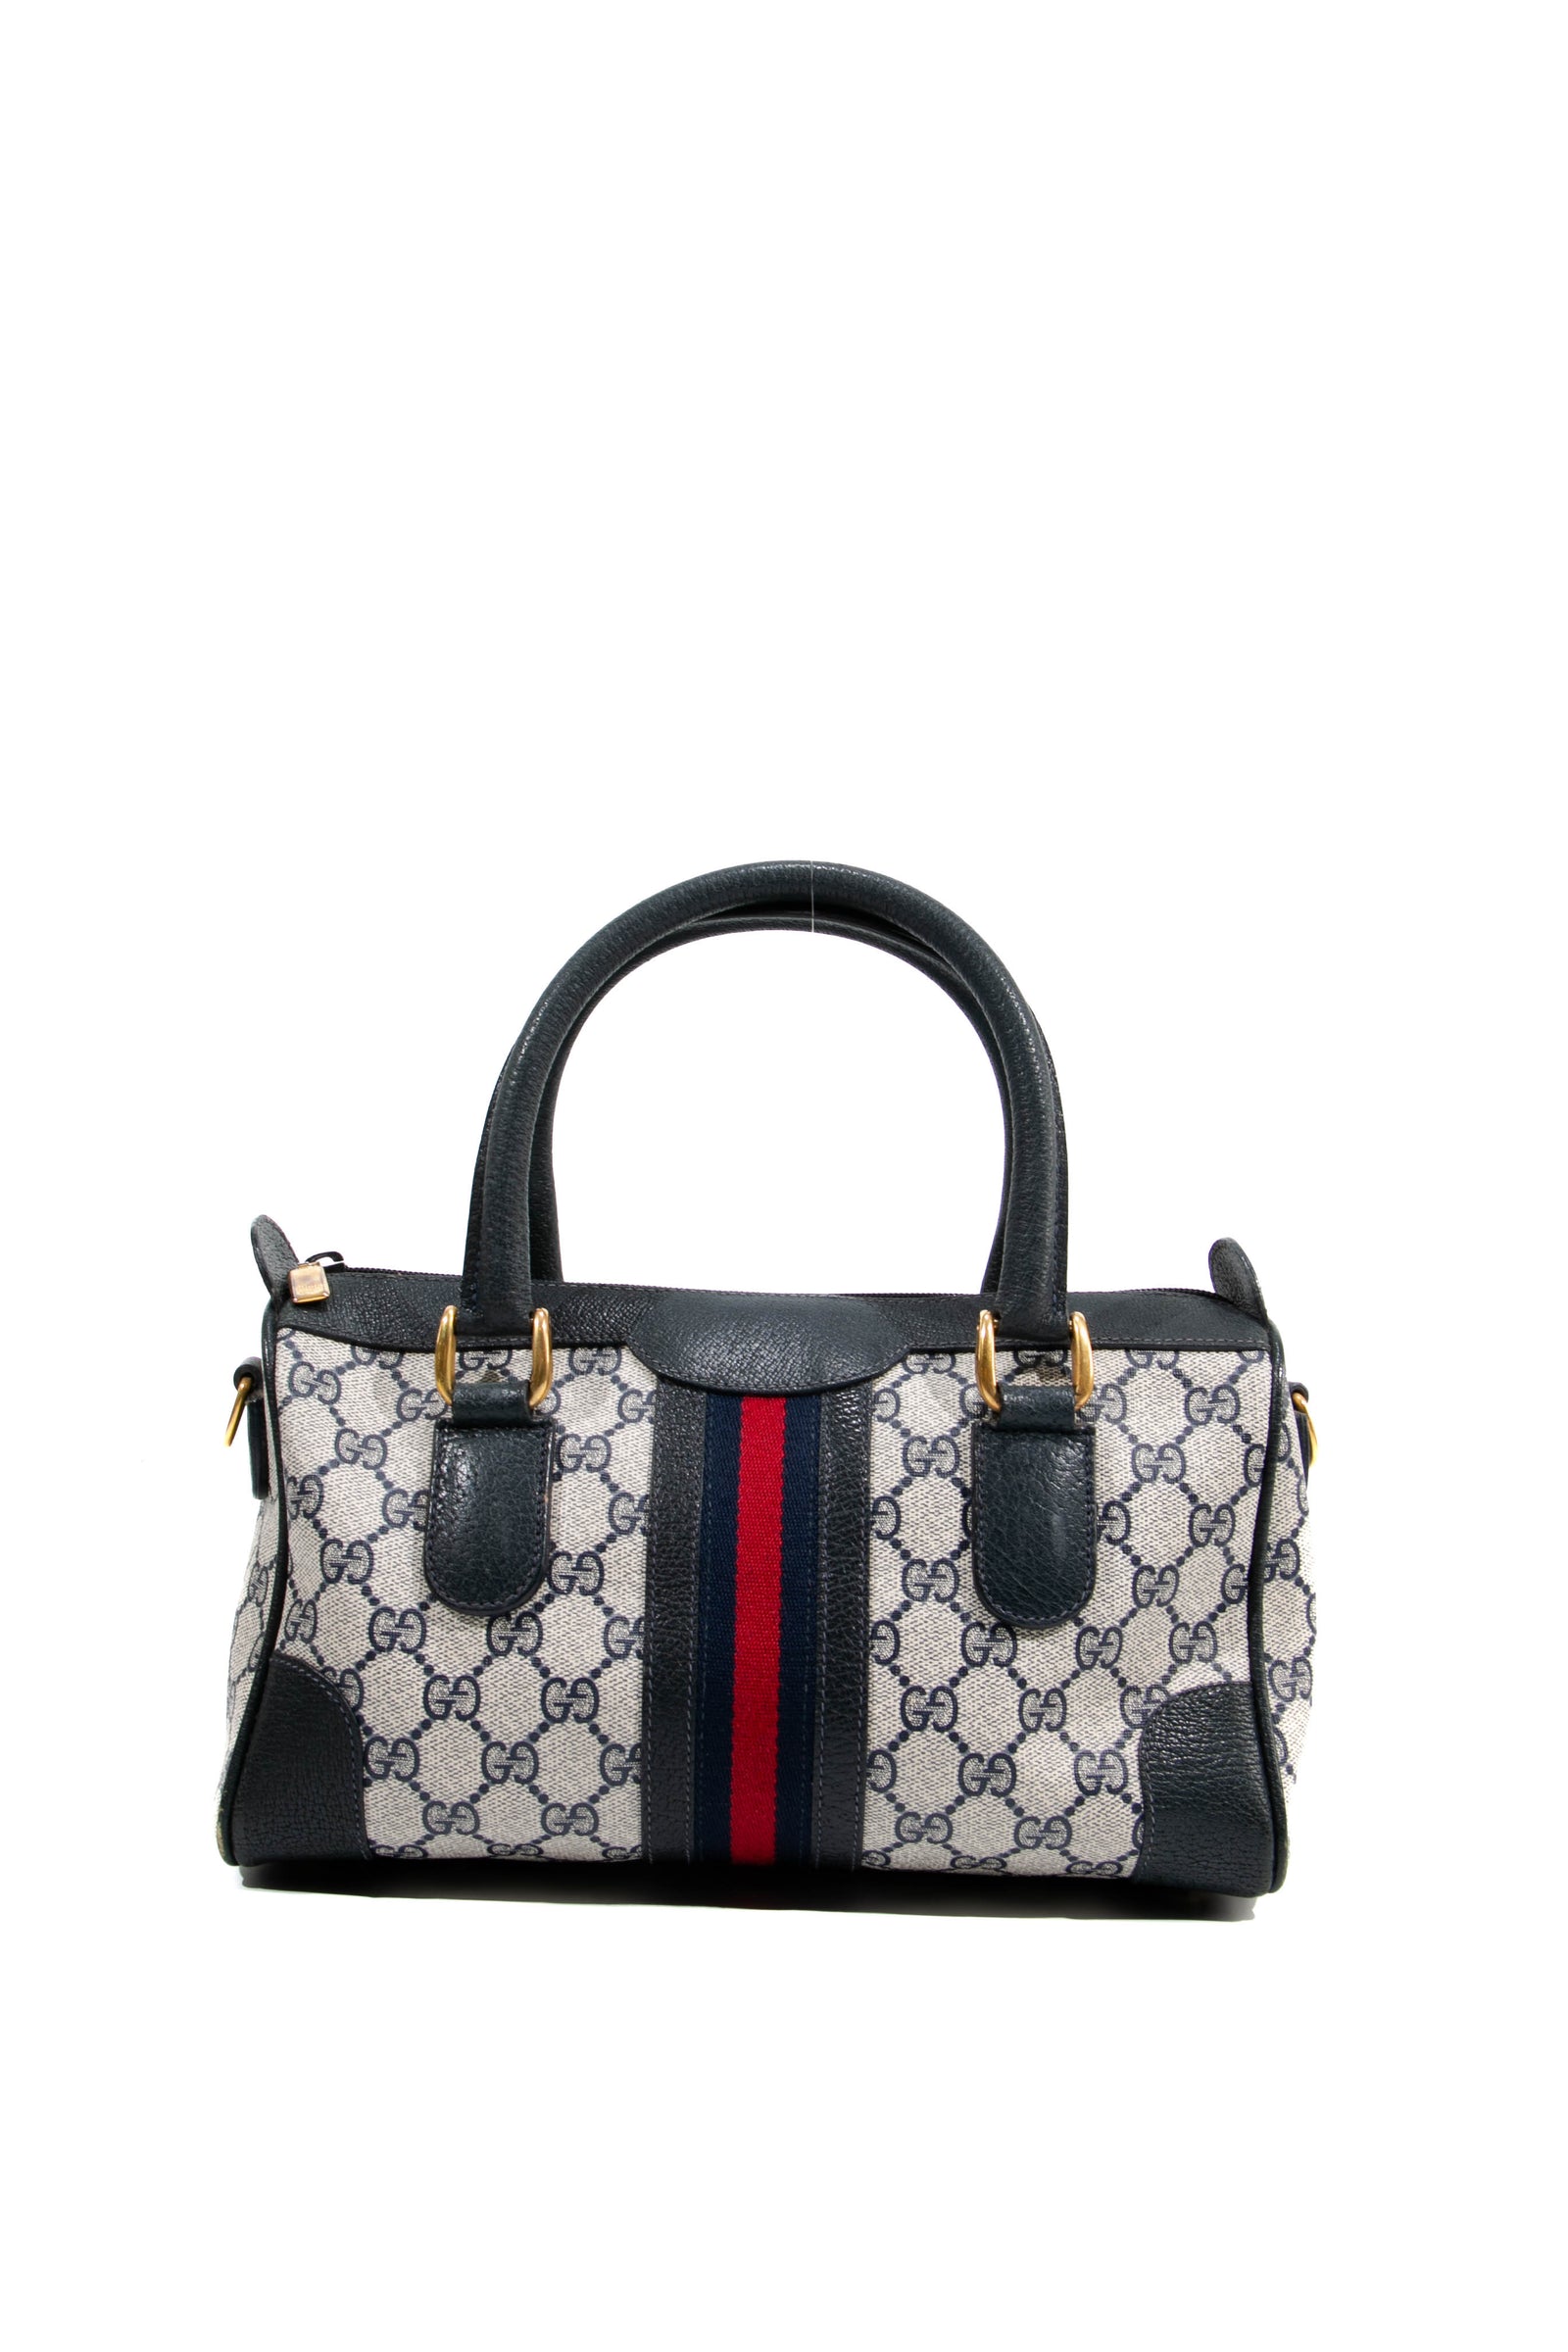 Gucci, Bags, Gucci Lunch Box Style Top Handle Handbag And Gucci Wallet